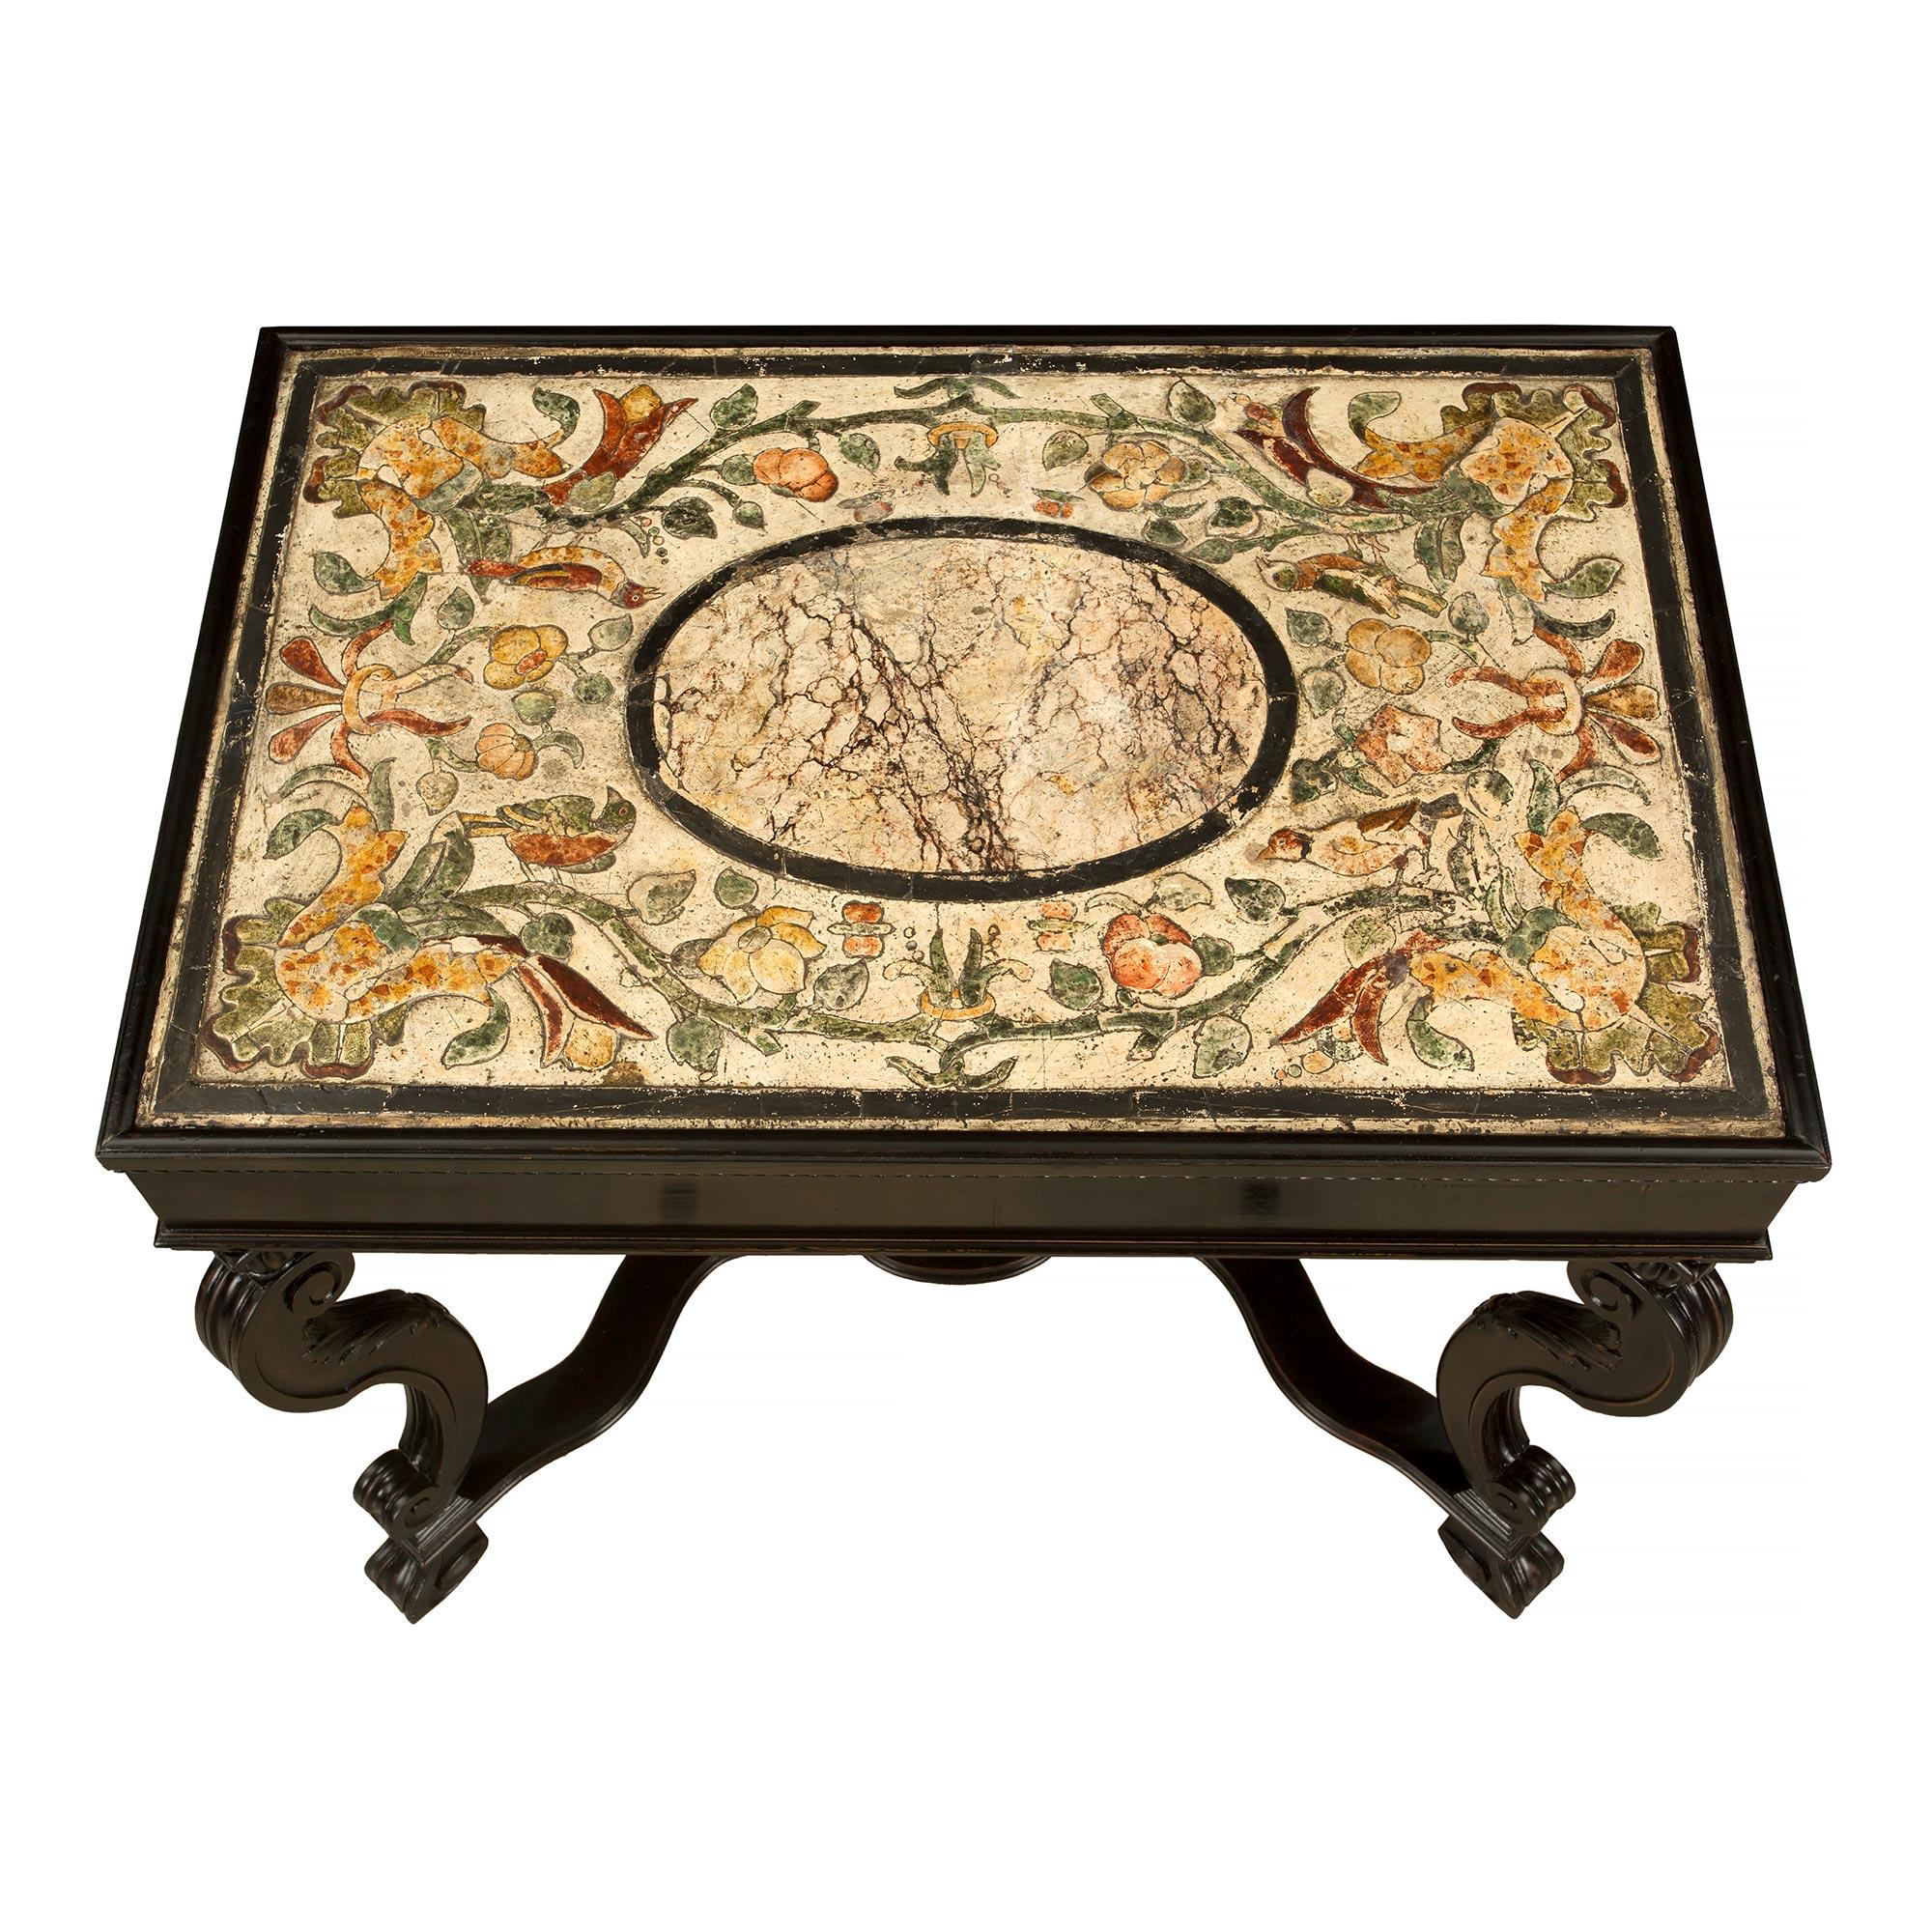 A most attractive and unique Italian 19th century Baroque st. ebonized fruitwood and Scagliola center table. The rectangular table is raised by four 'S' scrolled legs with a reeded outer design and acanthus leaves at the back. The legs are joined by